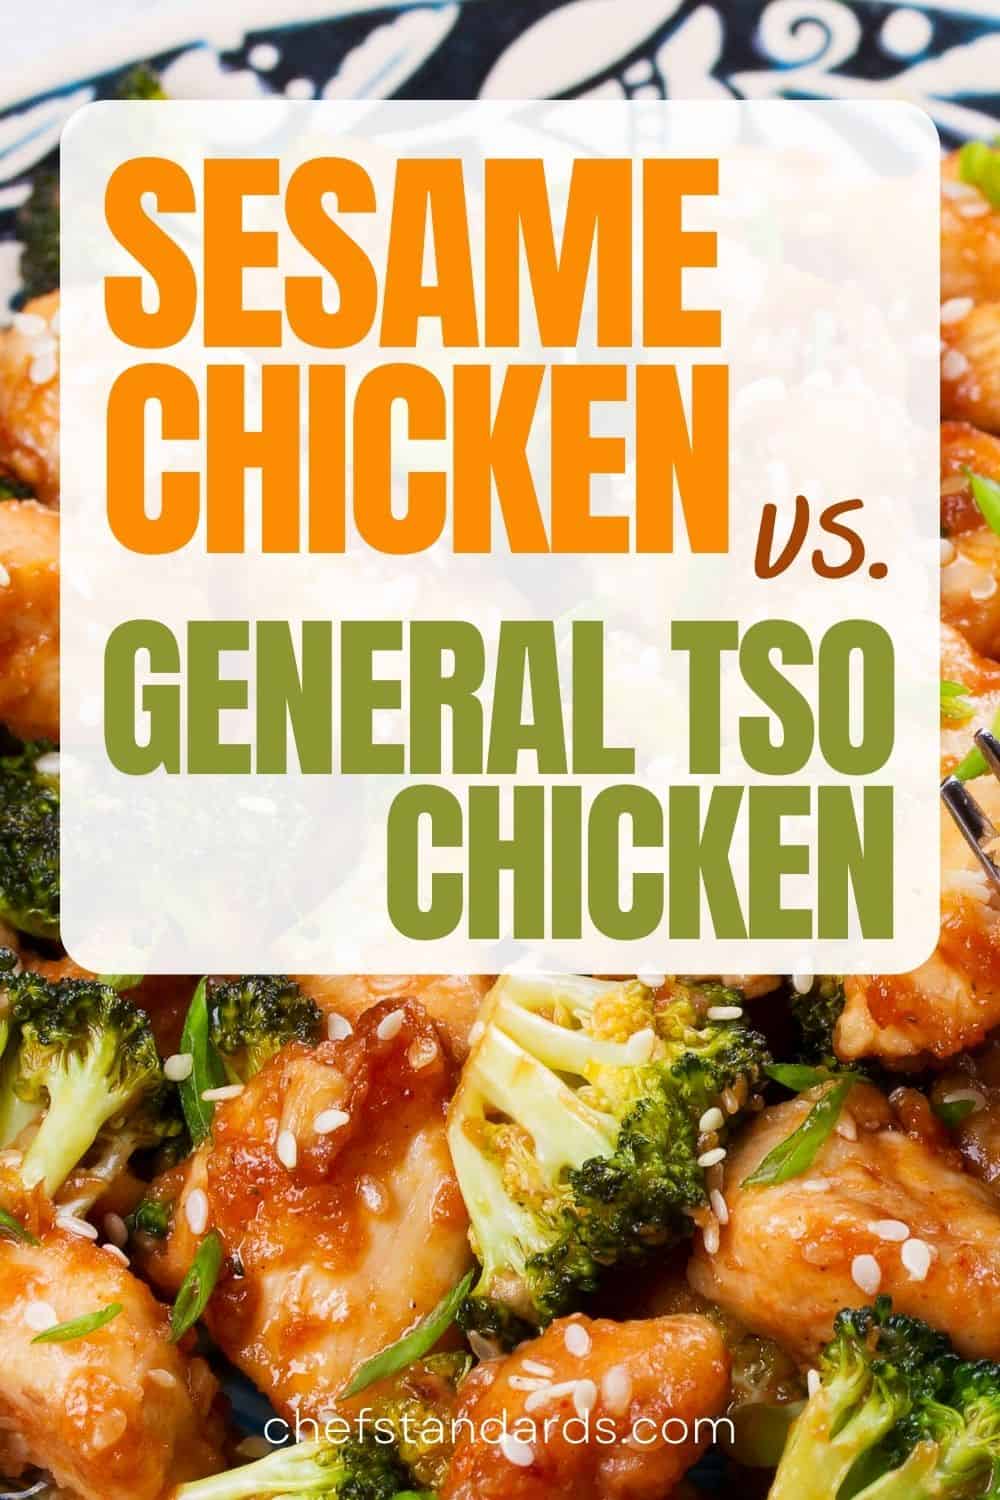  6 Key Differences Between Sesame Chicken And General Tso